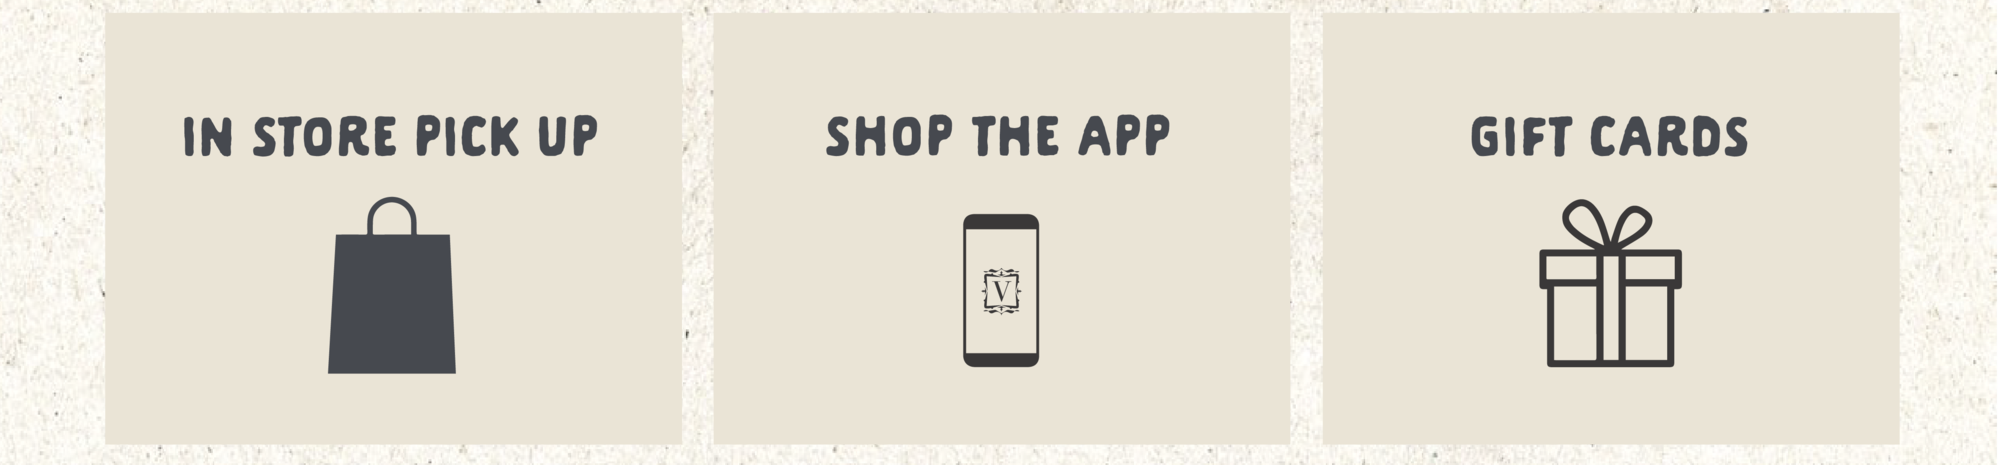 IN STORE PICK UP SHOP THE APP GIFT CARDS 